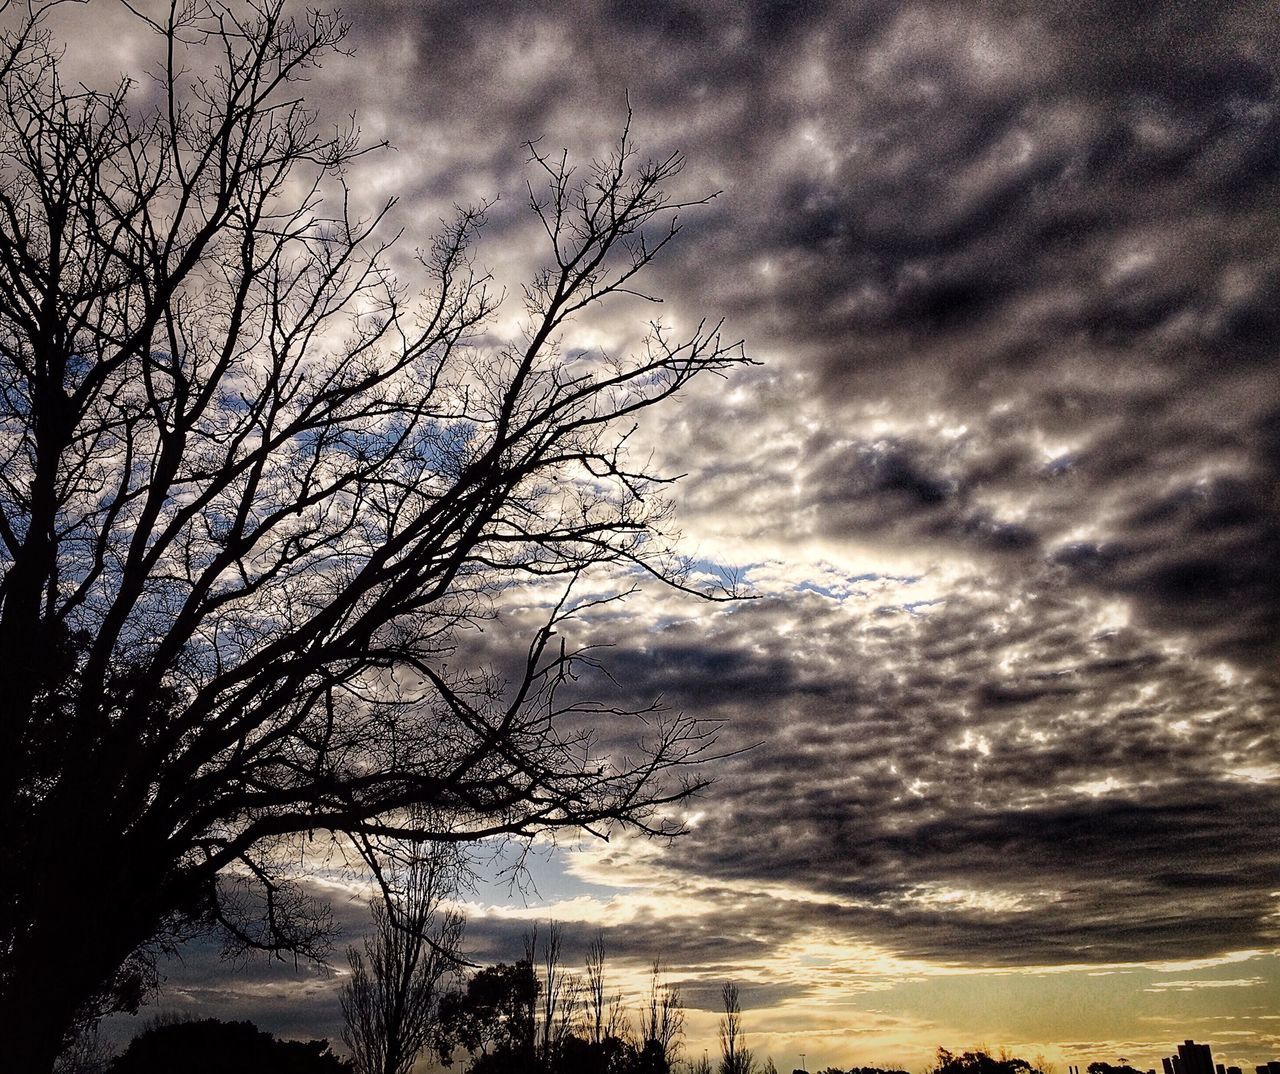 sky, cloud - sky, cloudy, silhouette, bare tree, low angle view, tranquility, tree, overcast, weather, nature, cloud, tranquil scene, beauty in nature, scenics, branch, storm cloud, dusk, dramatic sky, cloudscape